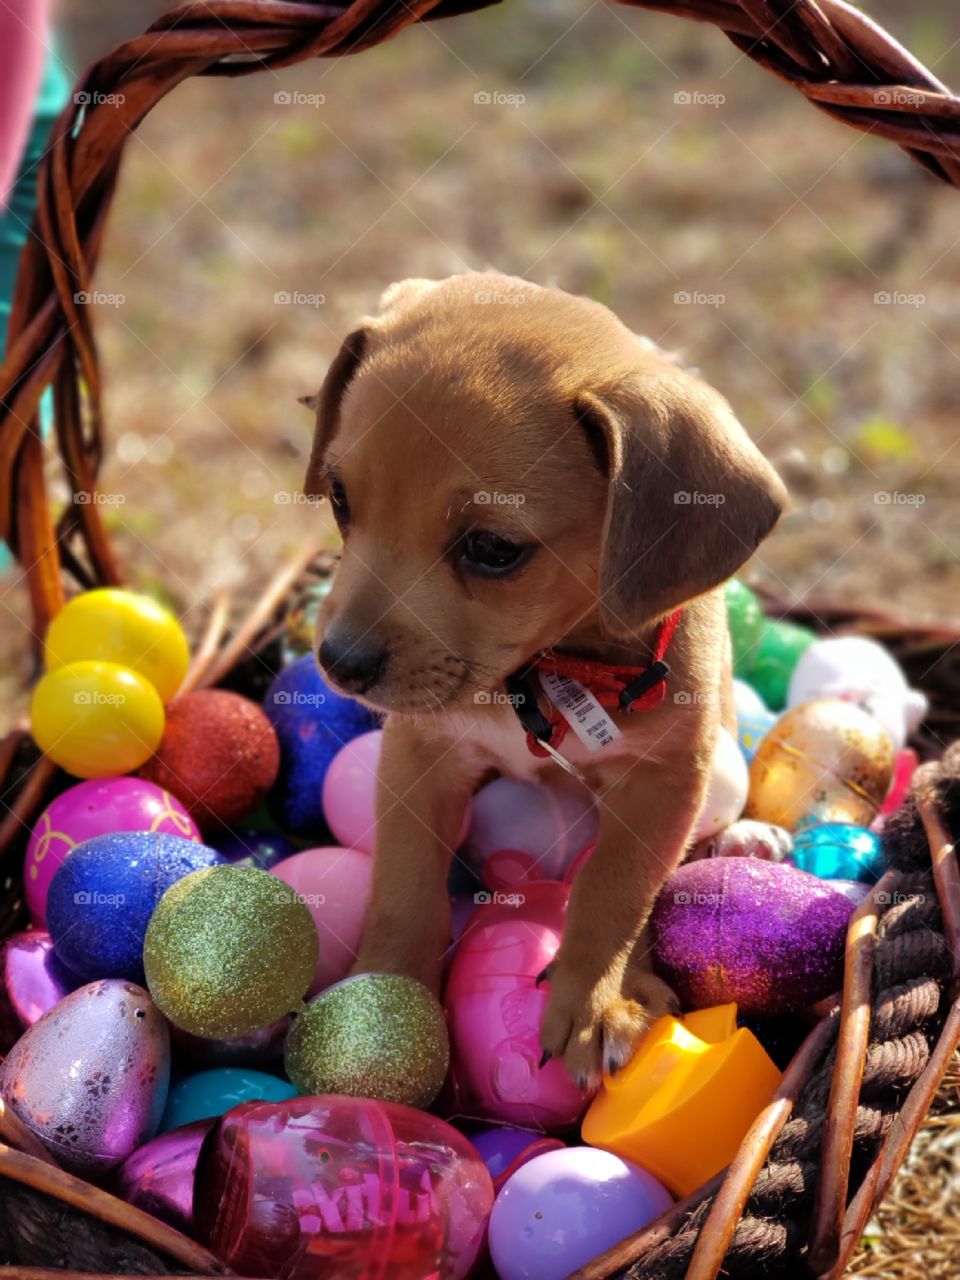 A dog's first Easter!